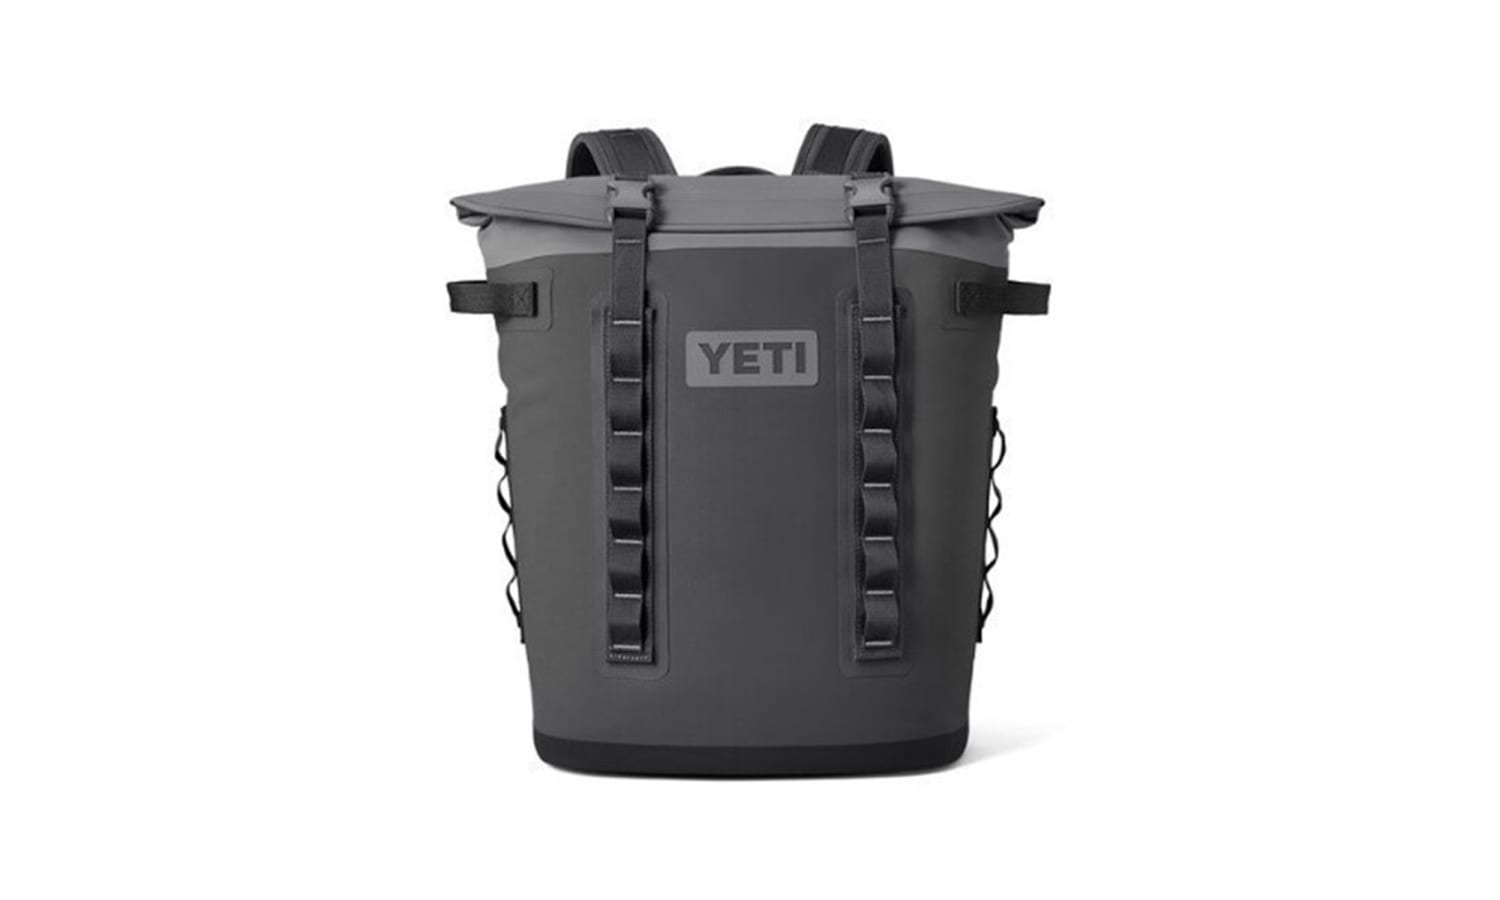 YETI wont sell me a repair kit for this hole despite their website saying  they will. They denied my request saying that the kits are only sent out  for warranty claims not